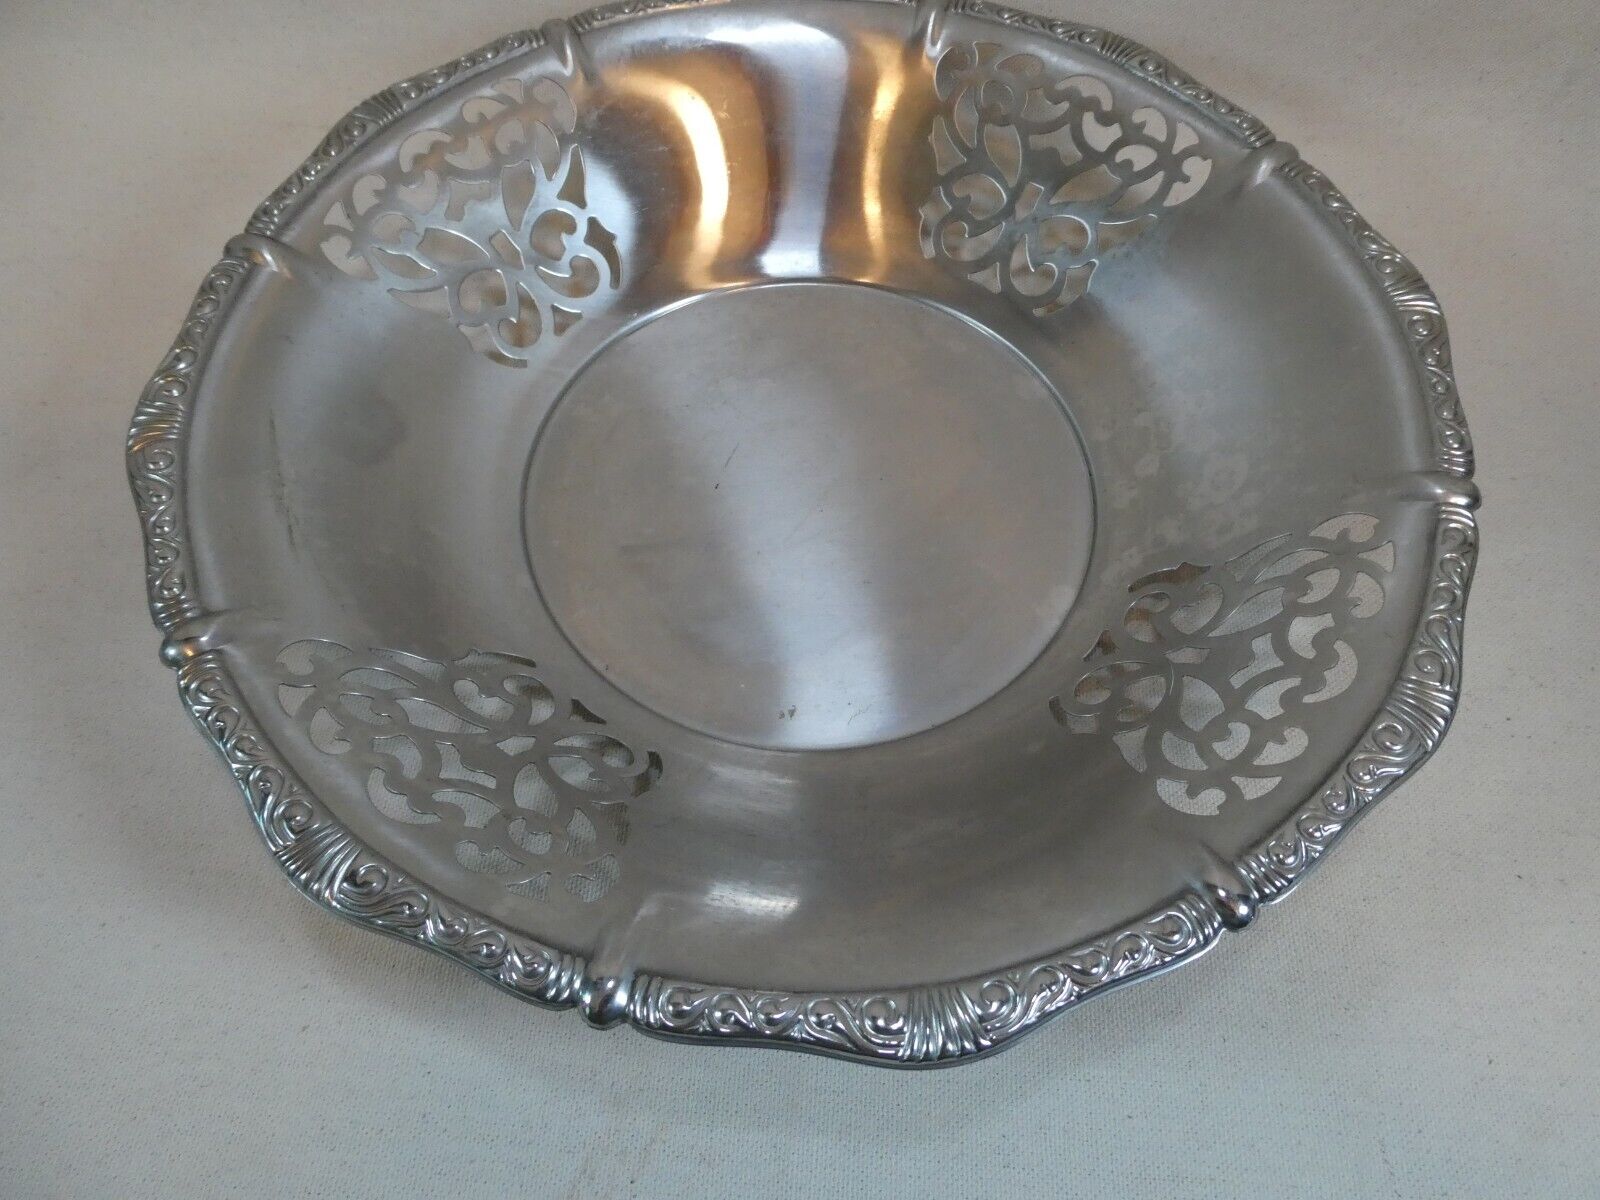 International Stainless Alessi 18-8 Italy 4017 Decorative Metal Bowl 10.75\